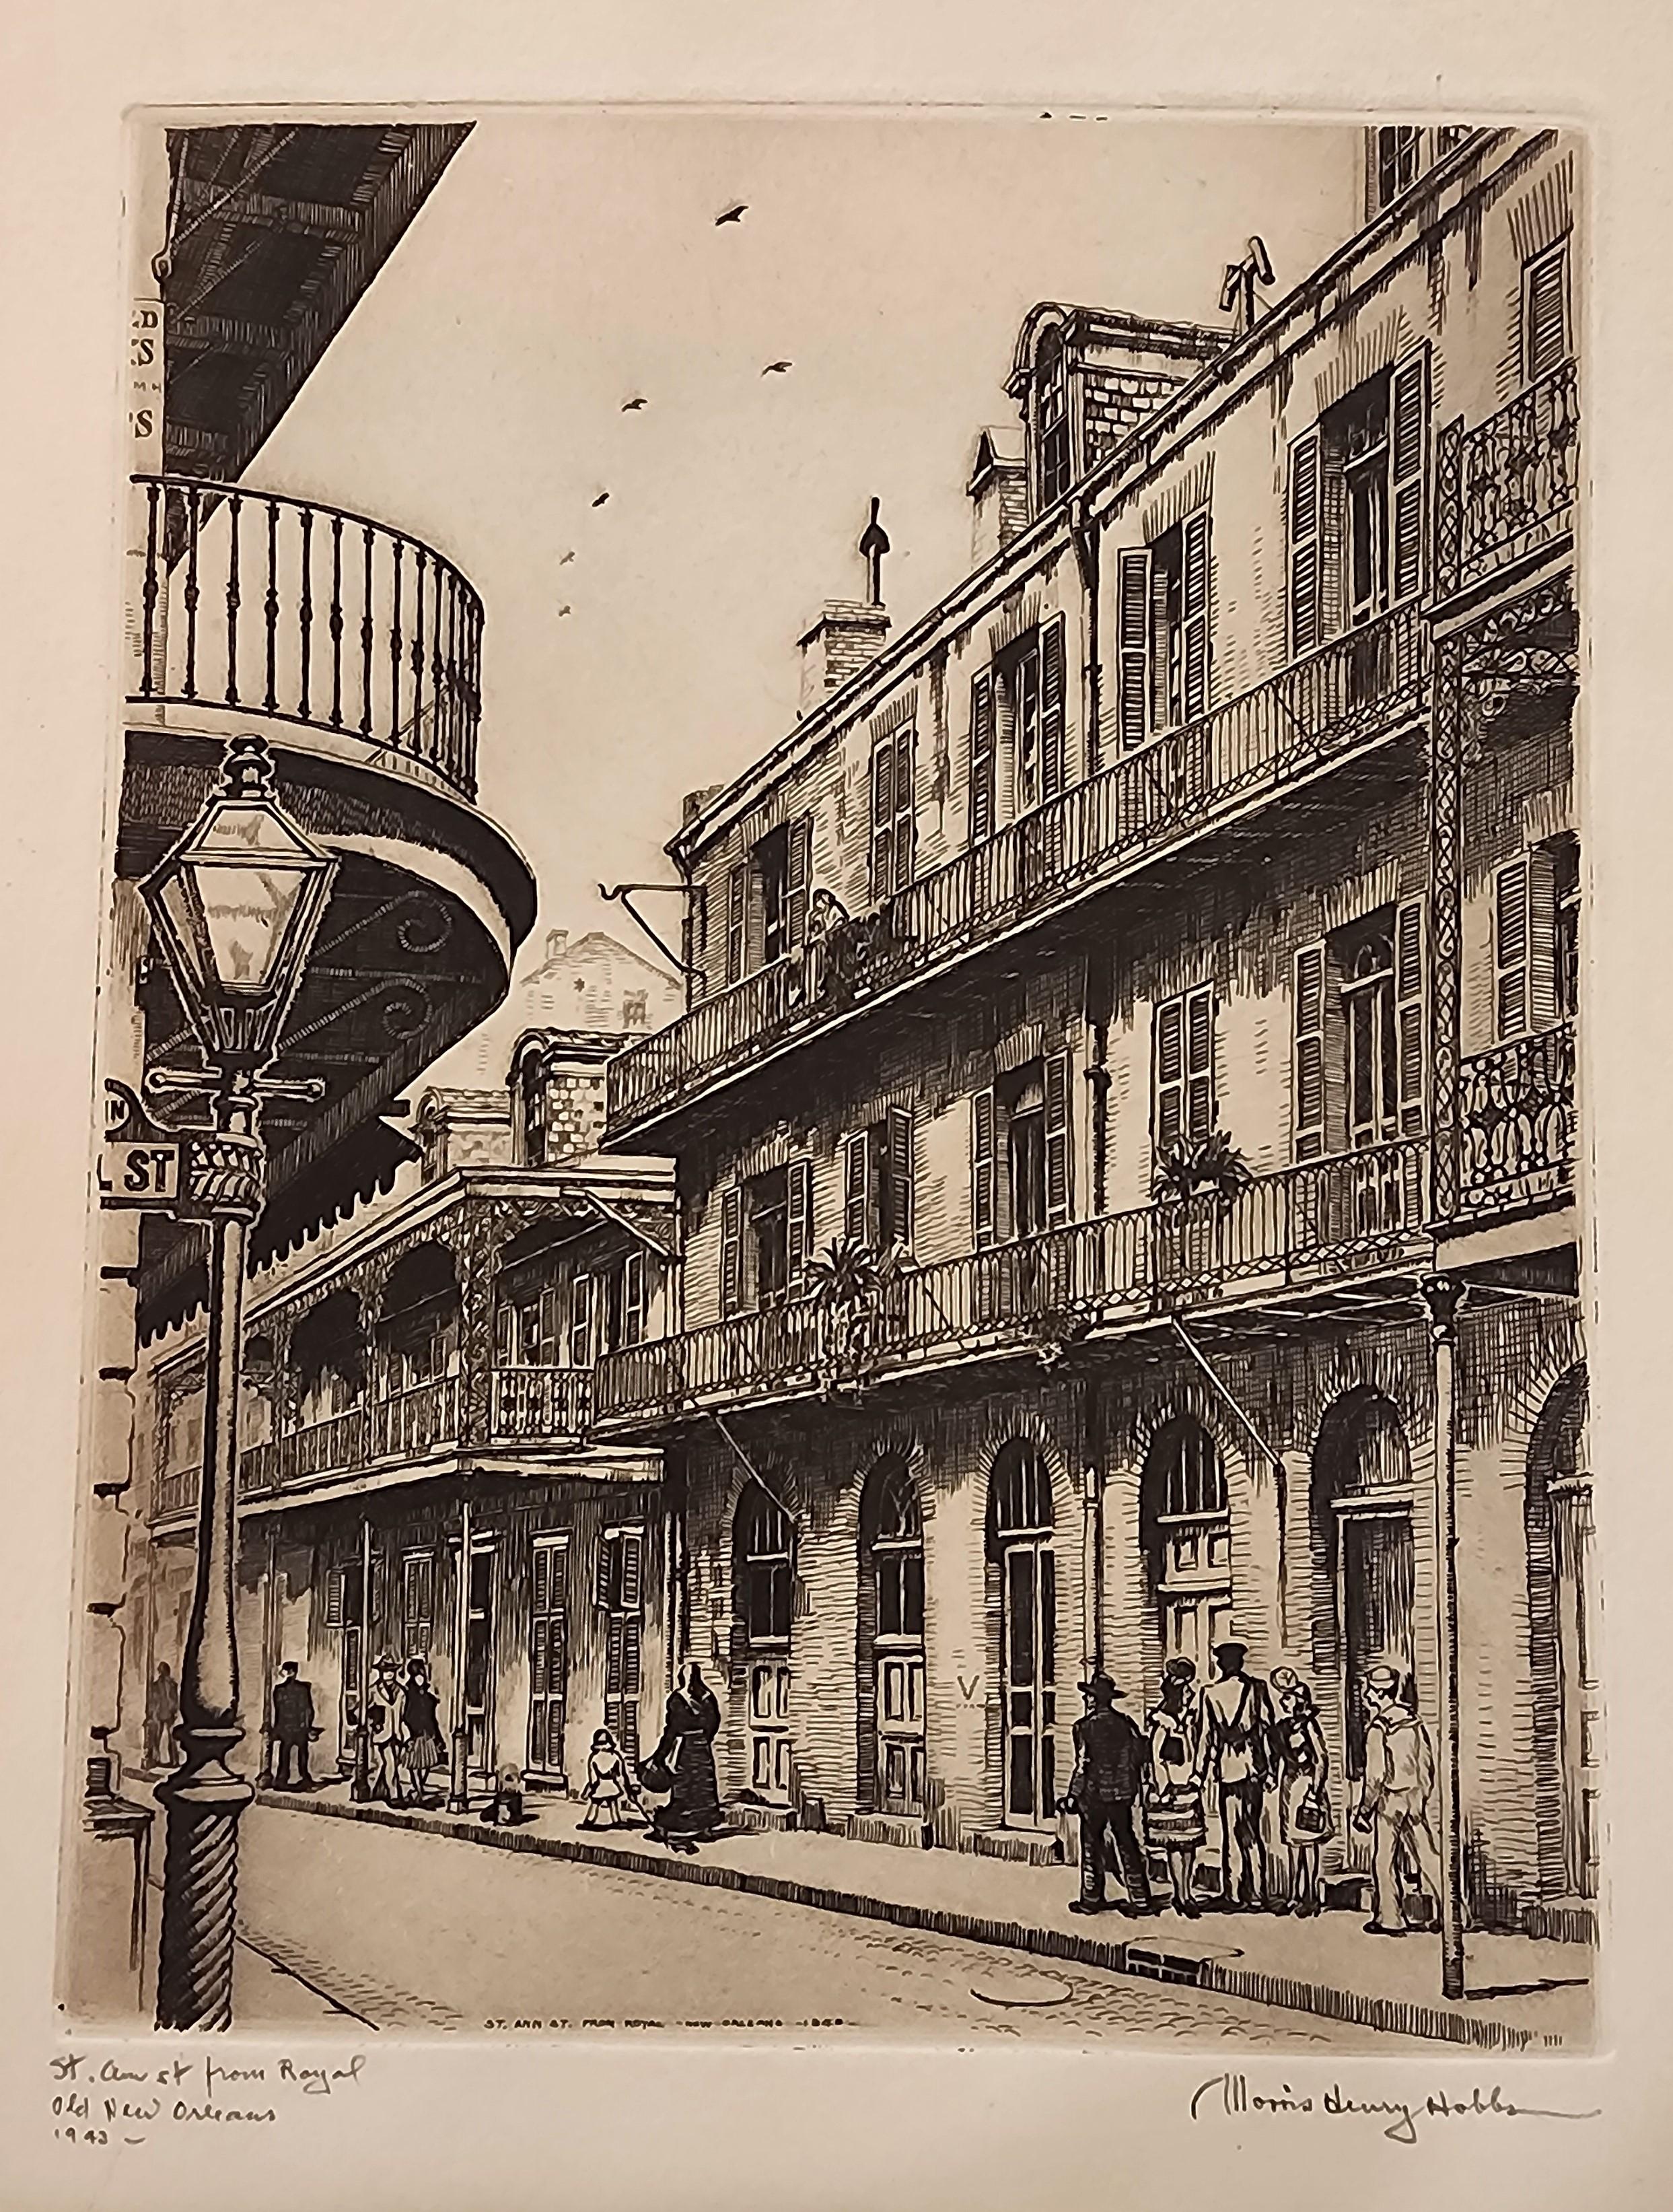 St. Ann St. from Royal, Old New Orleans - Print by Morris Henry Hobbs